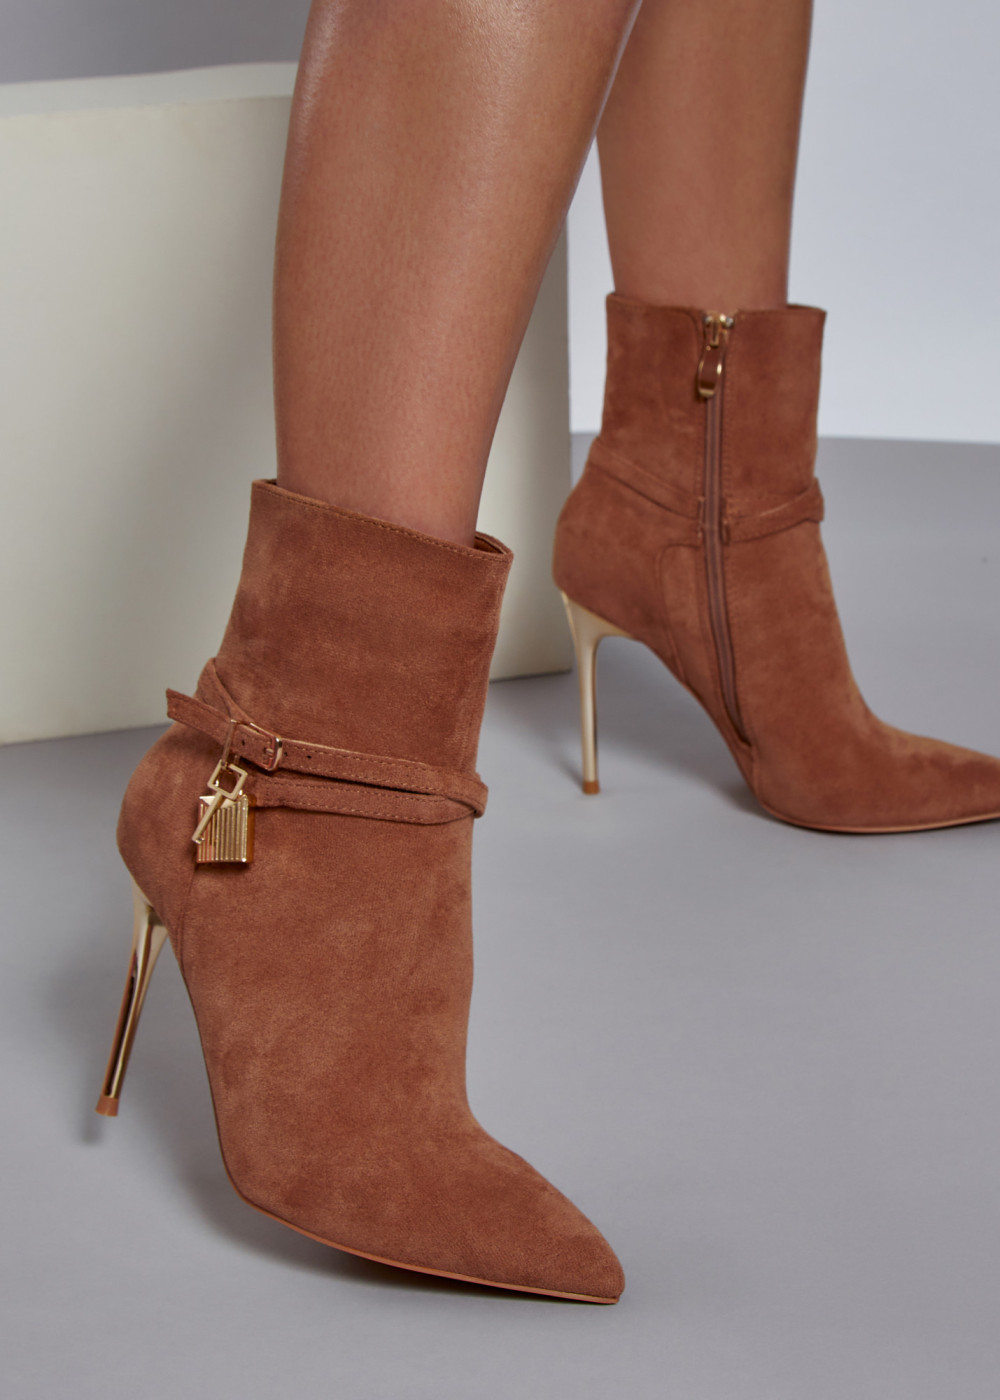 Tan pointed toe stiletto style ankle boots 3